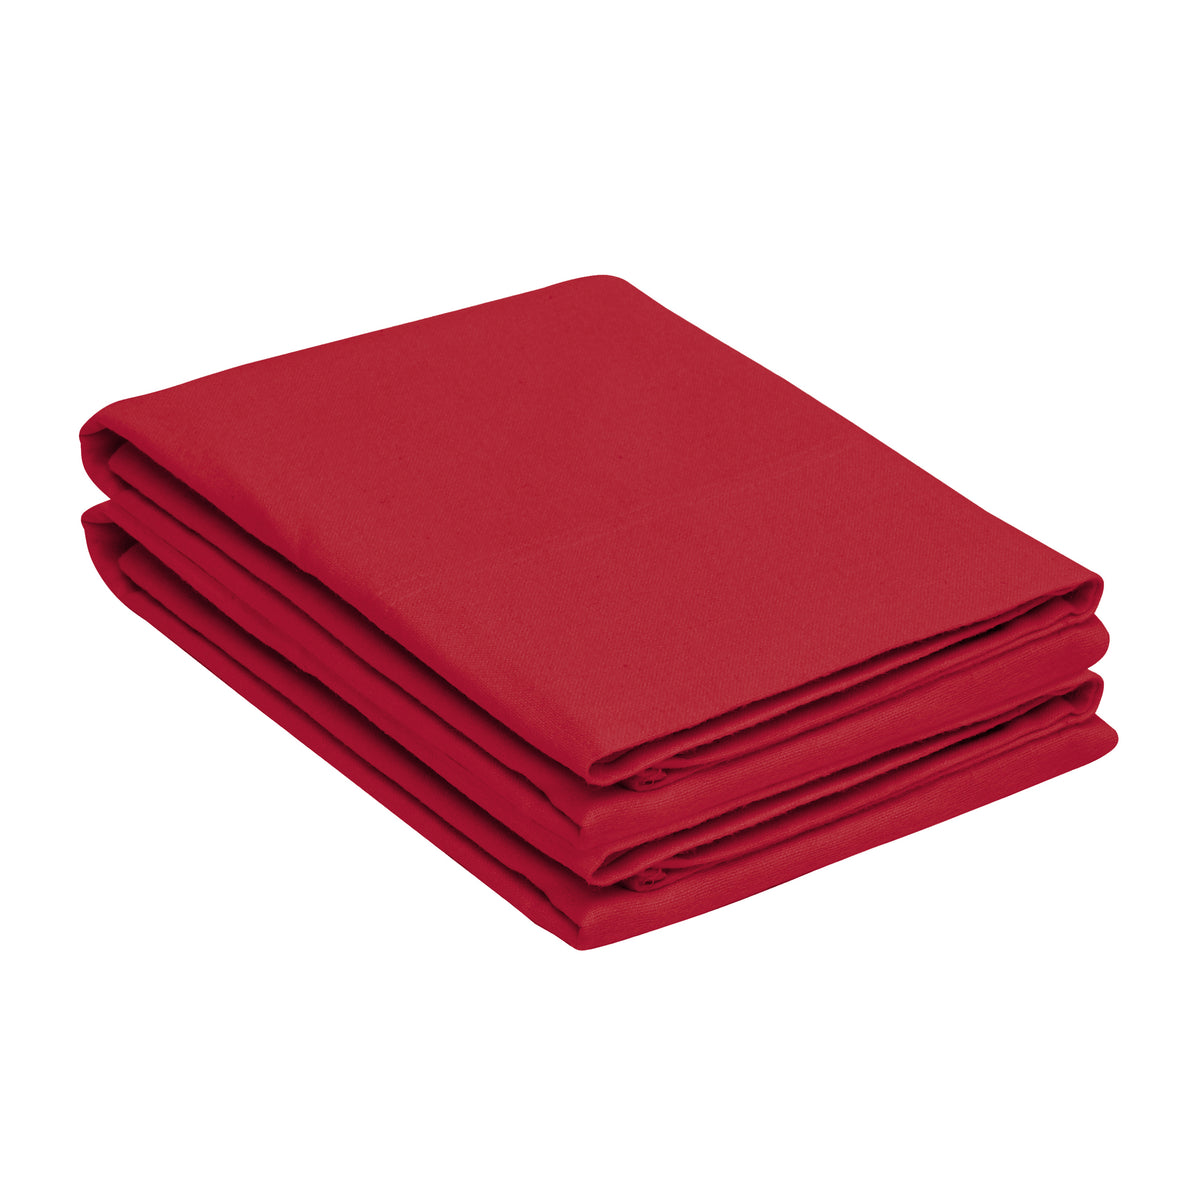 Solid Flannel Cotton Soft Fuzzy Pillowcases, Set of 2 - Burgundy